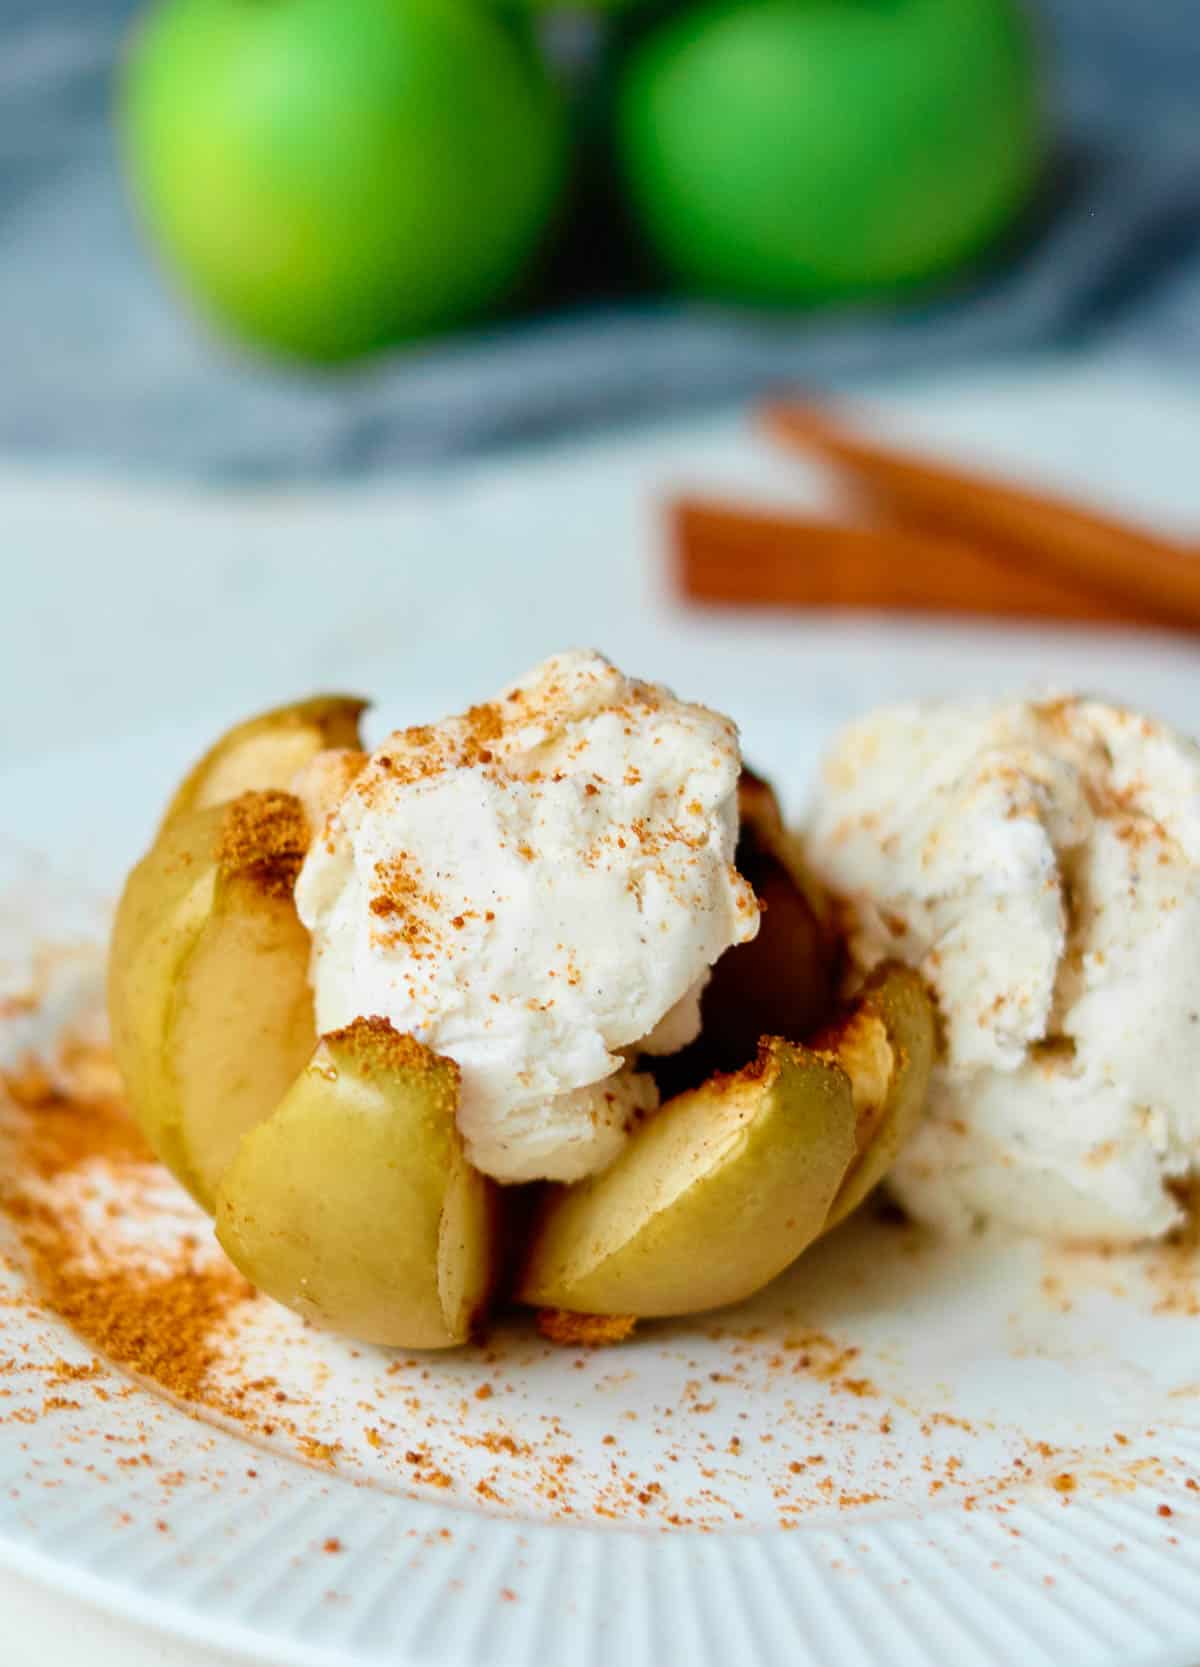 baked apple topped with ice cream and cinnamon